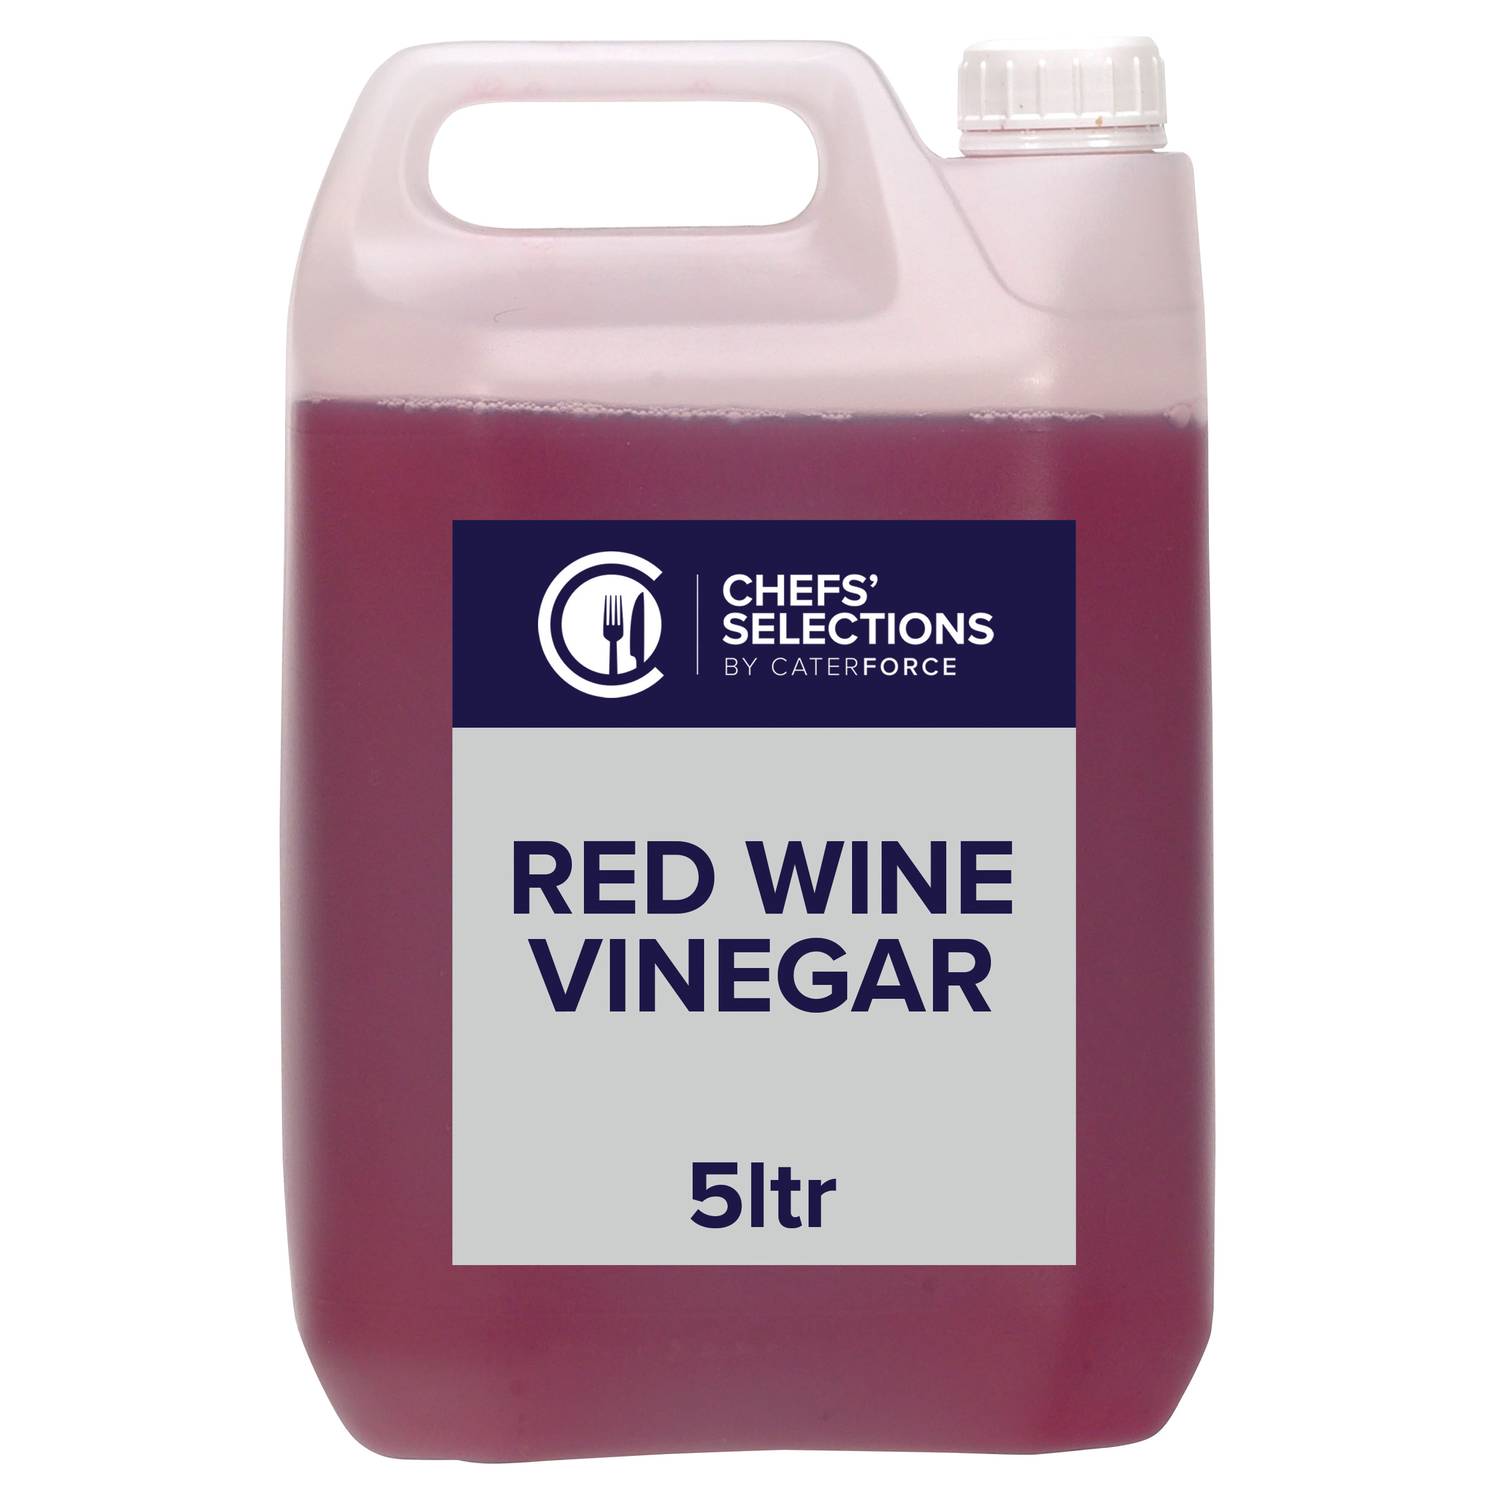 Chefs’ Selections Red Wine Vinegar (4 x 5L)